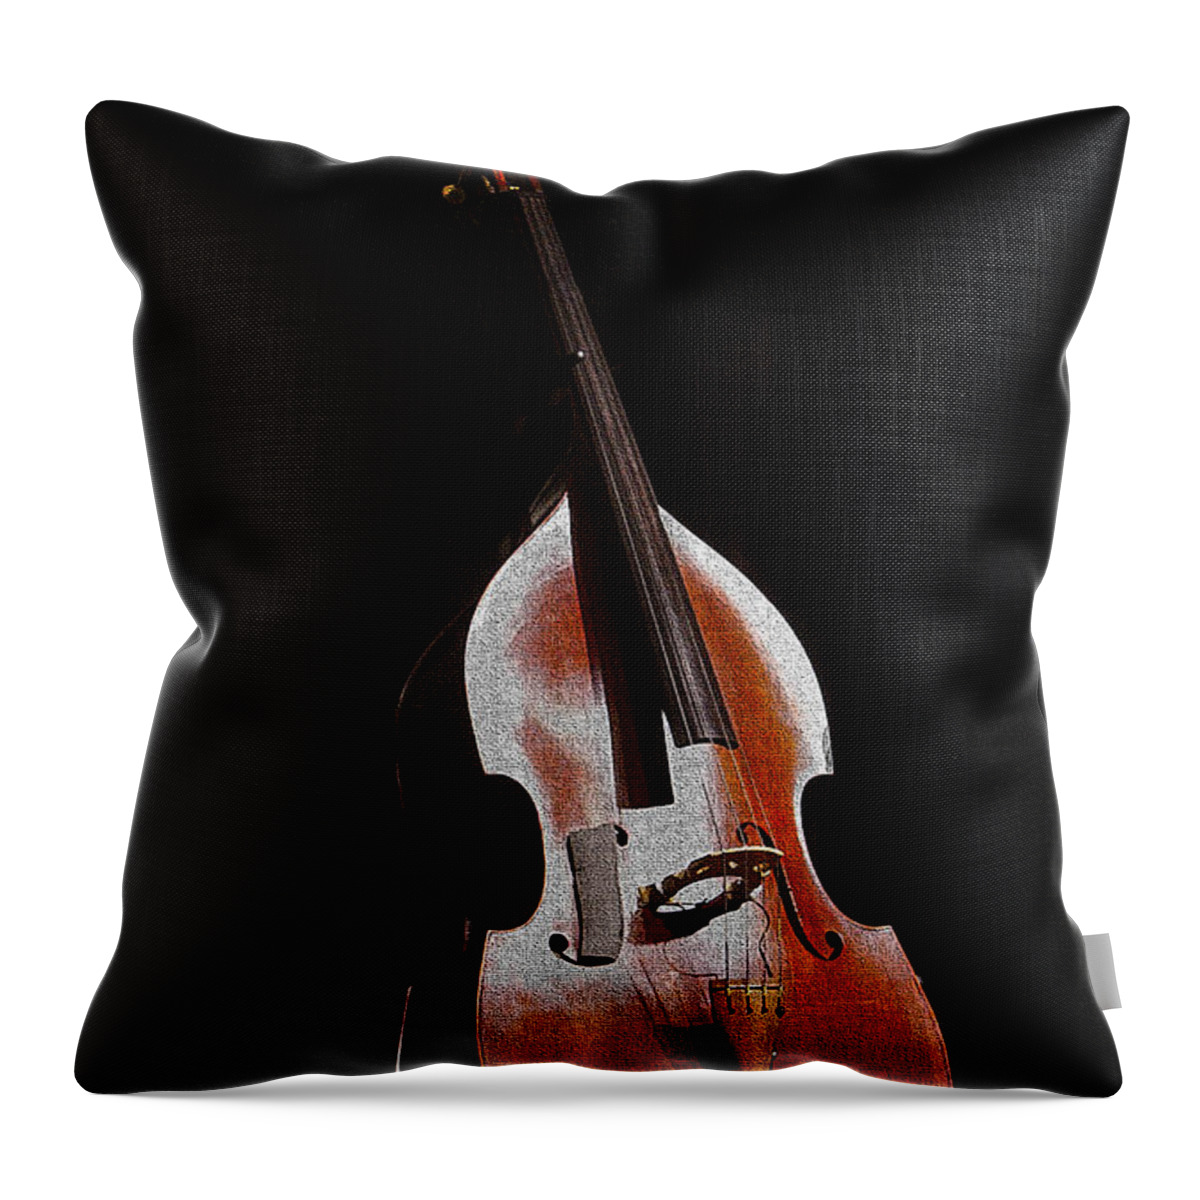 Andrew's Base Throw Pillow featuring the photograph Andrew's Bass by Kandy Hurley